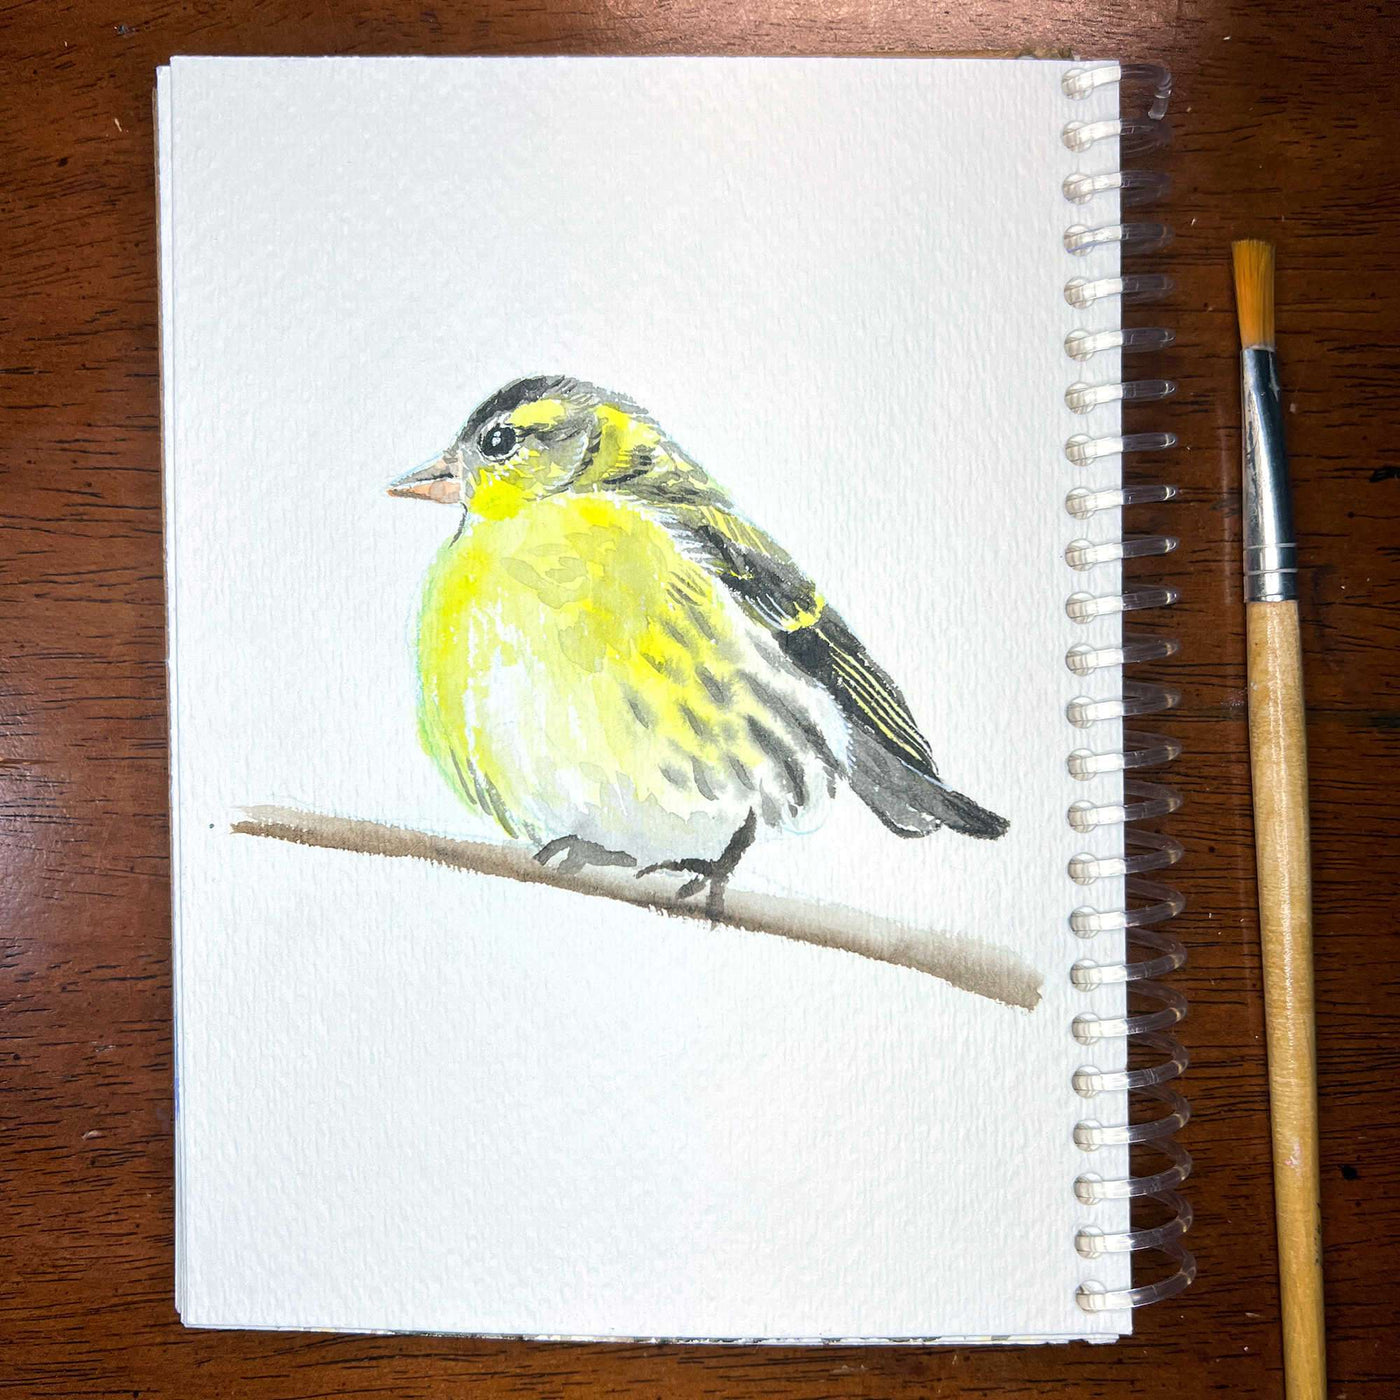 Watercolor sketch of a cheerful goldfinch on a sketchpad next to a paintbrush for size reference